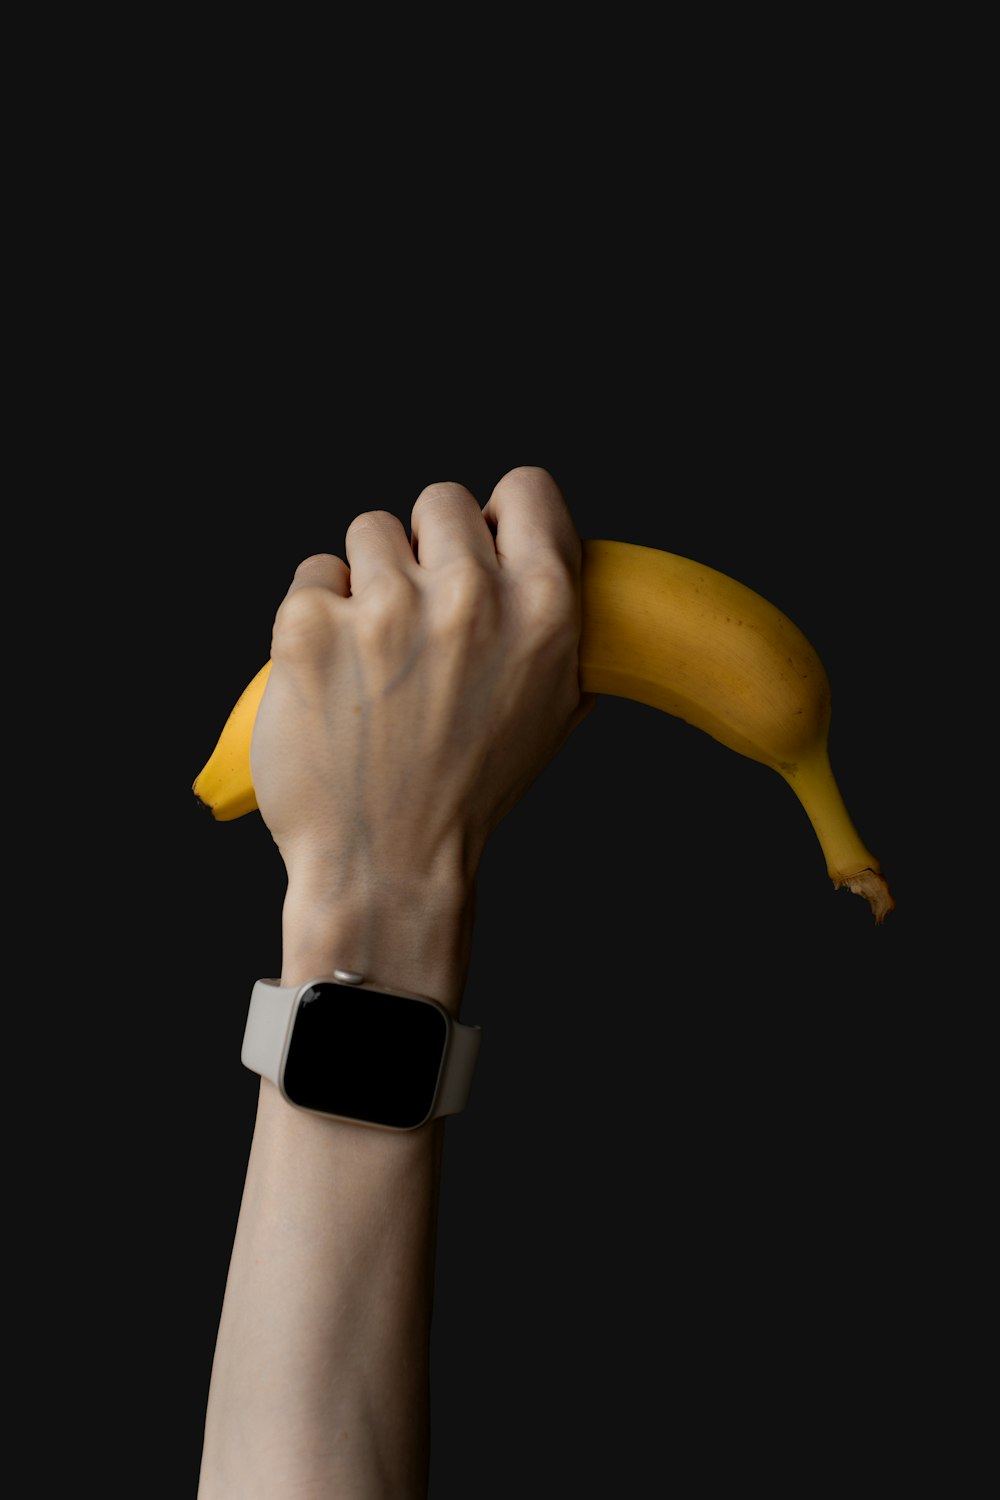 a person is holding a banana in their hand